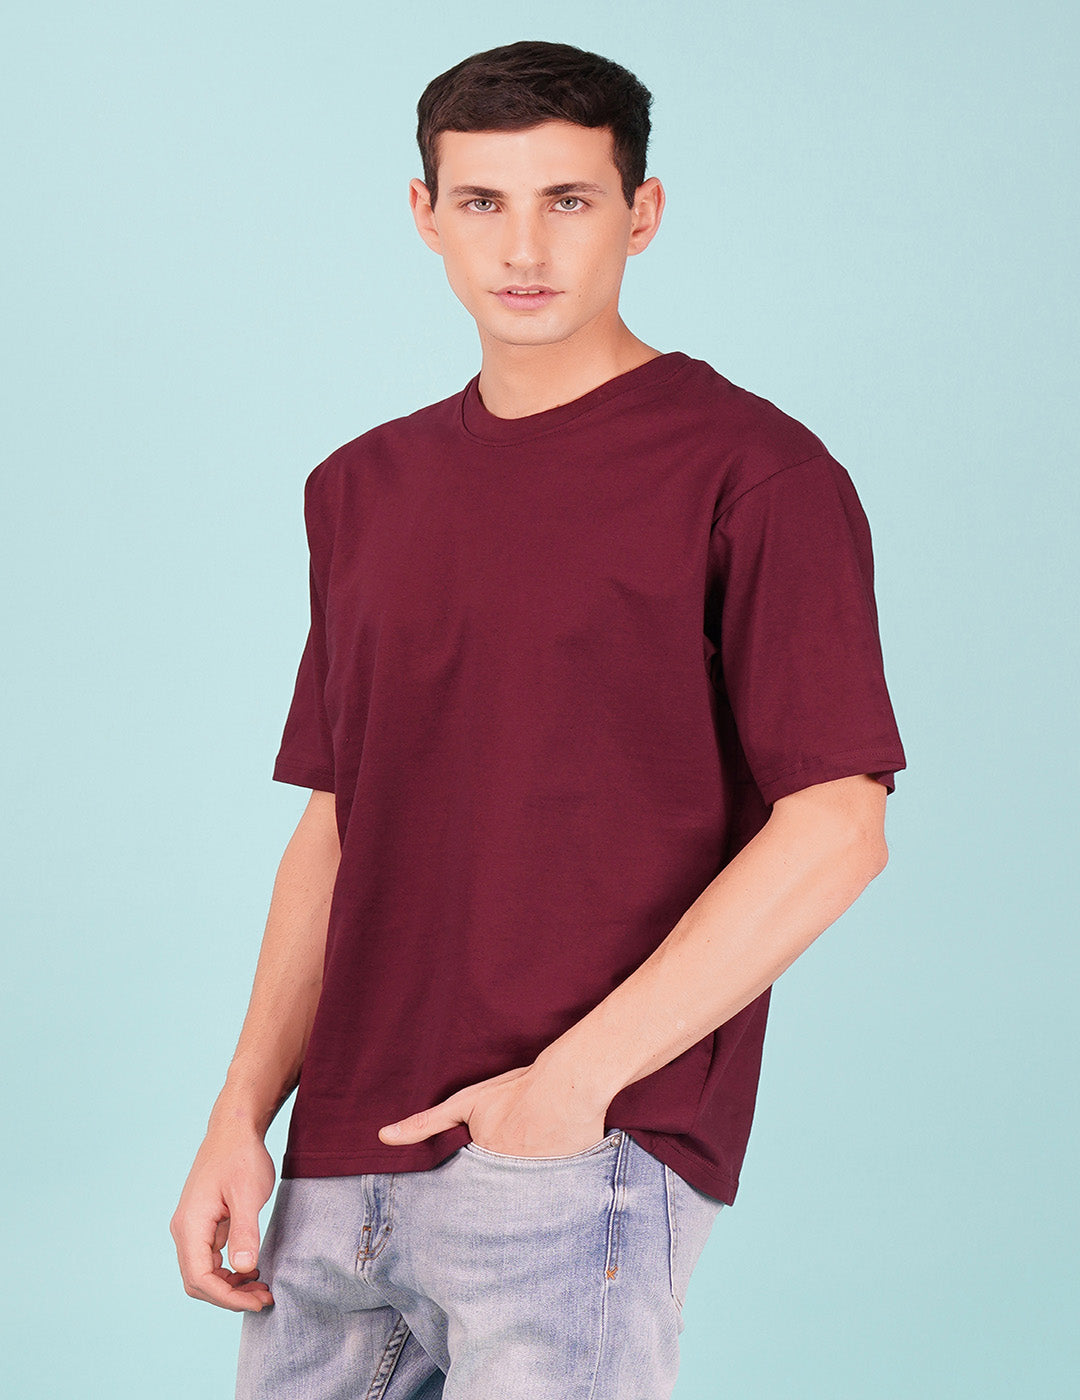 Nusyl Wine No fear back Printed oversized t-shirt